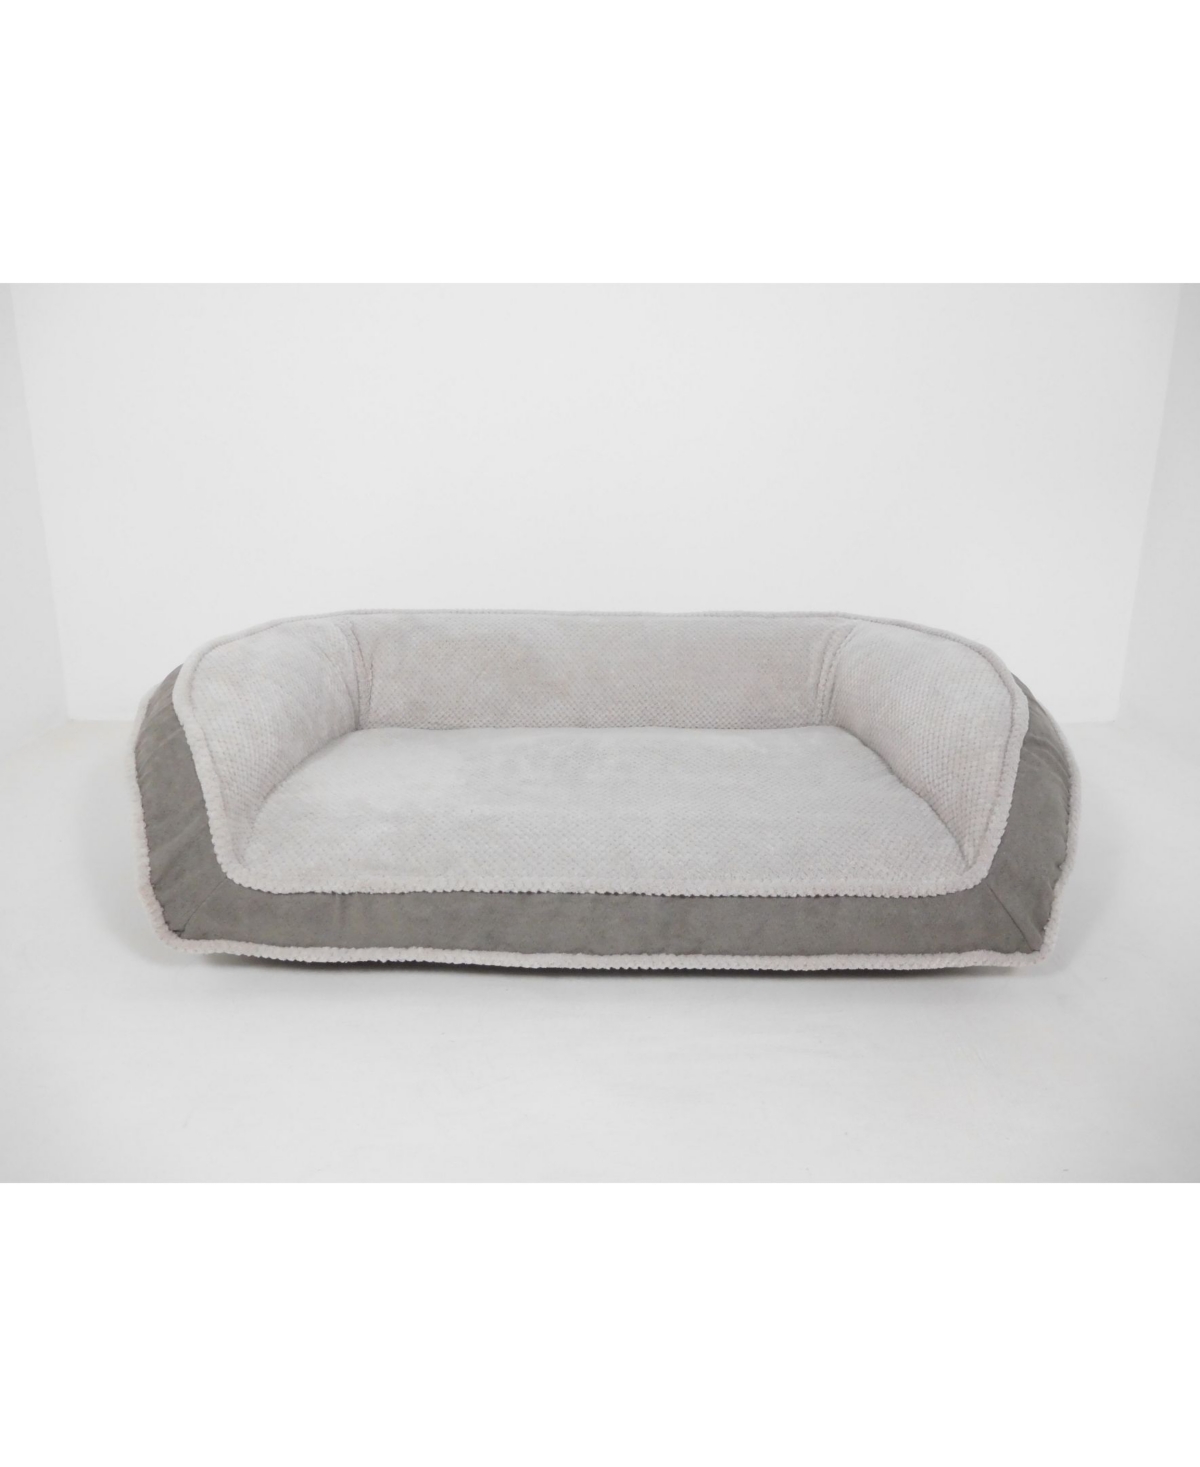 Closeout! Arlee Deep Seated Lounger Sofa and Couch Style Pet Bed, Small - Charcoal Gray